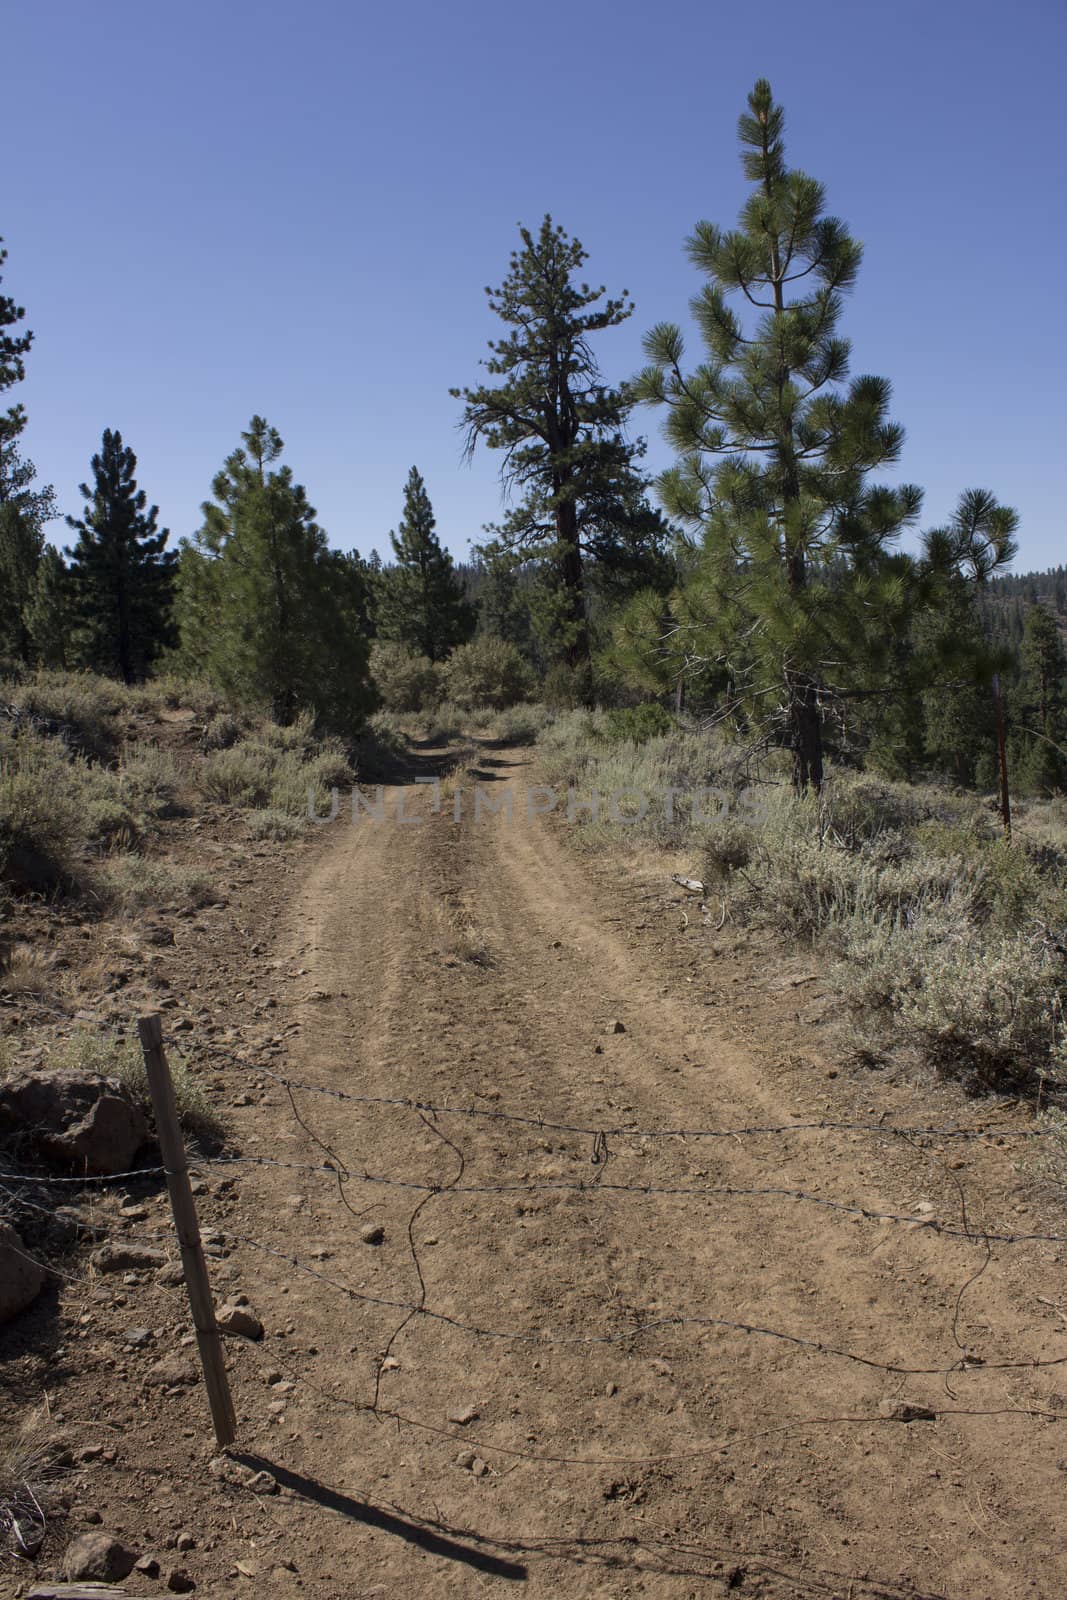 A barb wire fence across a dirt road in the forest by jeremywhat